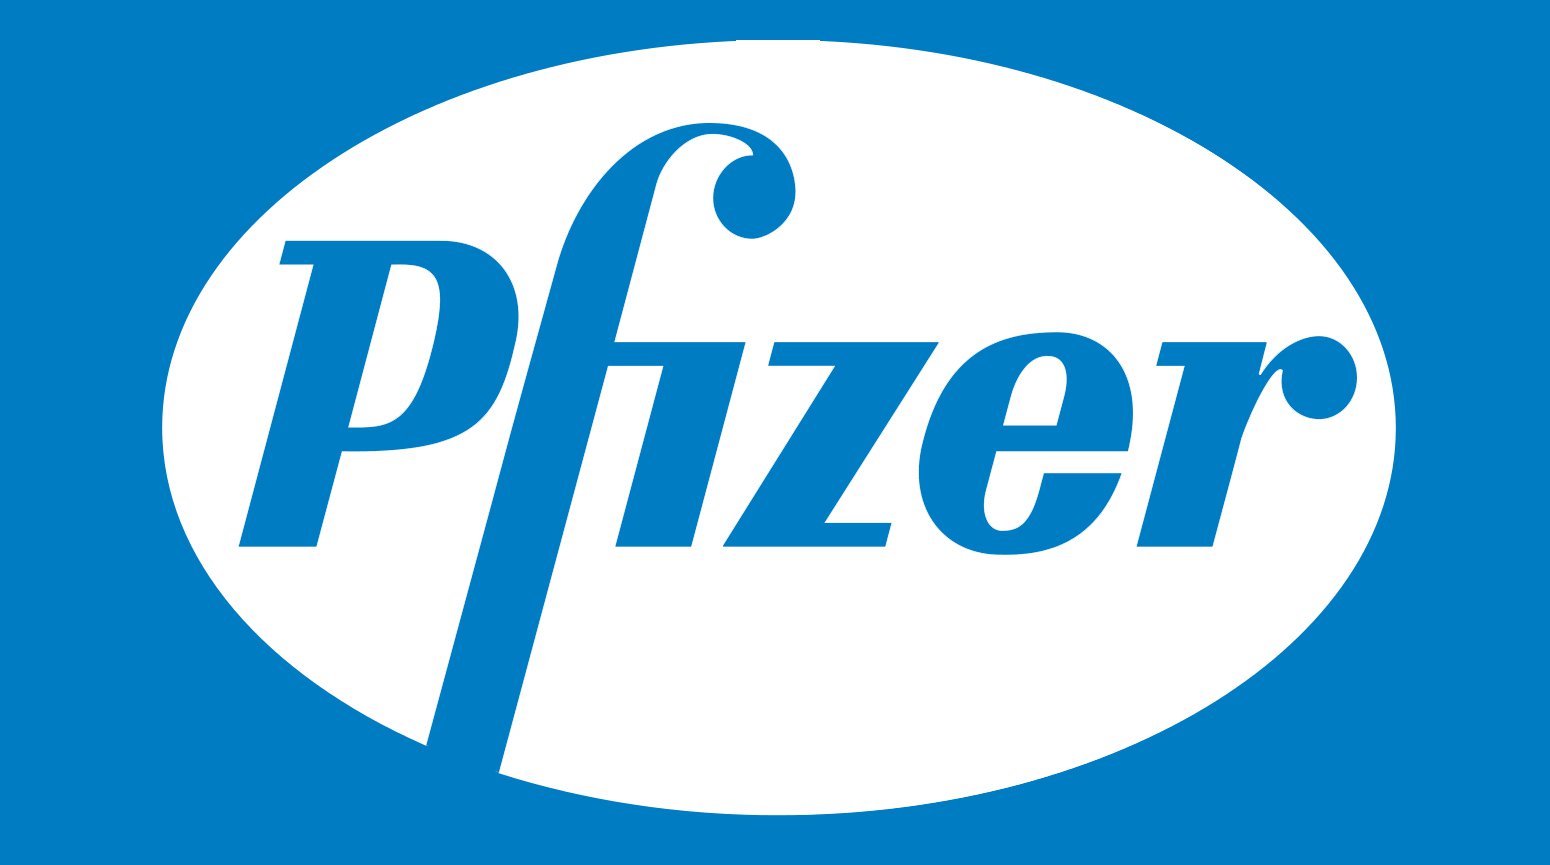 Covid-19: Pfizer starts large trial for anti-Covid pill